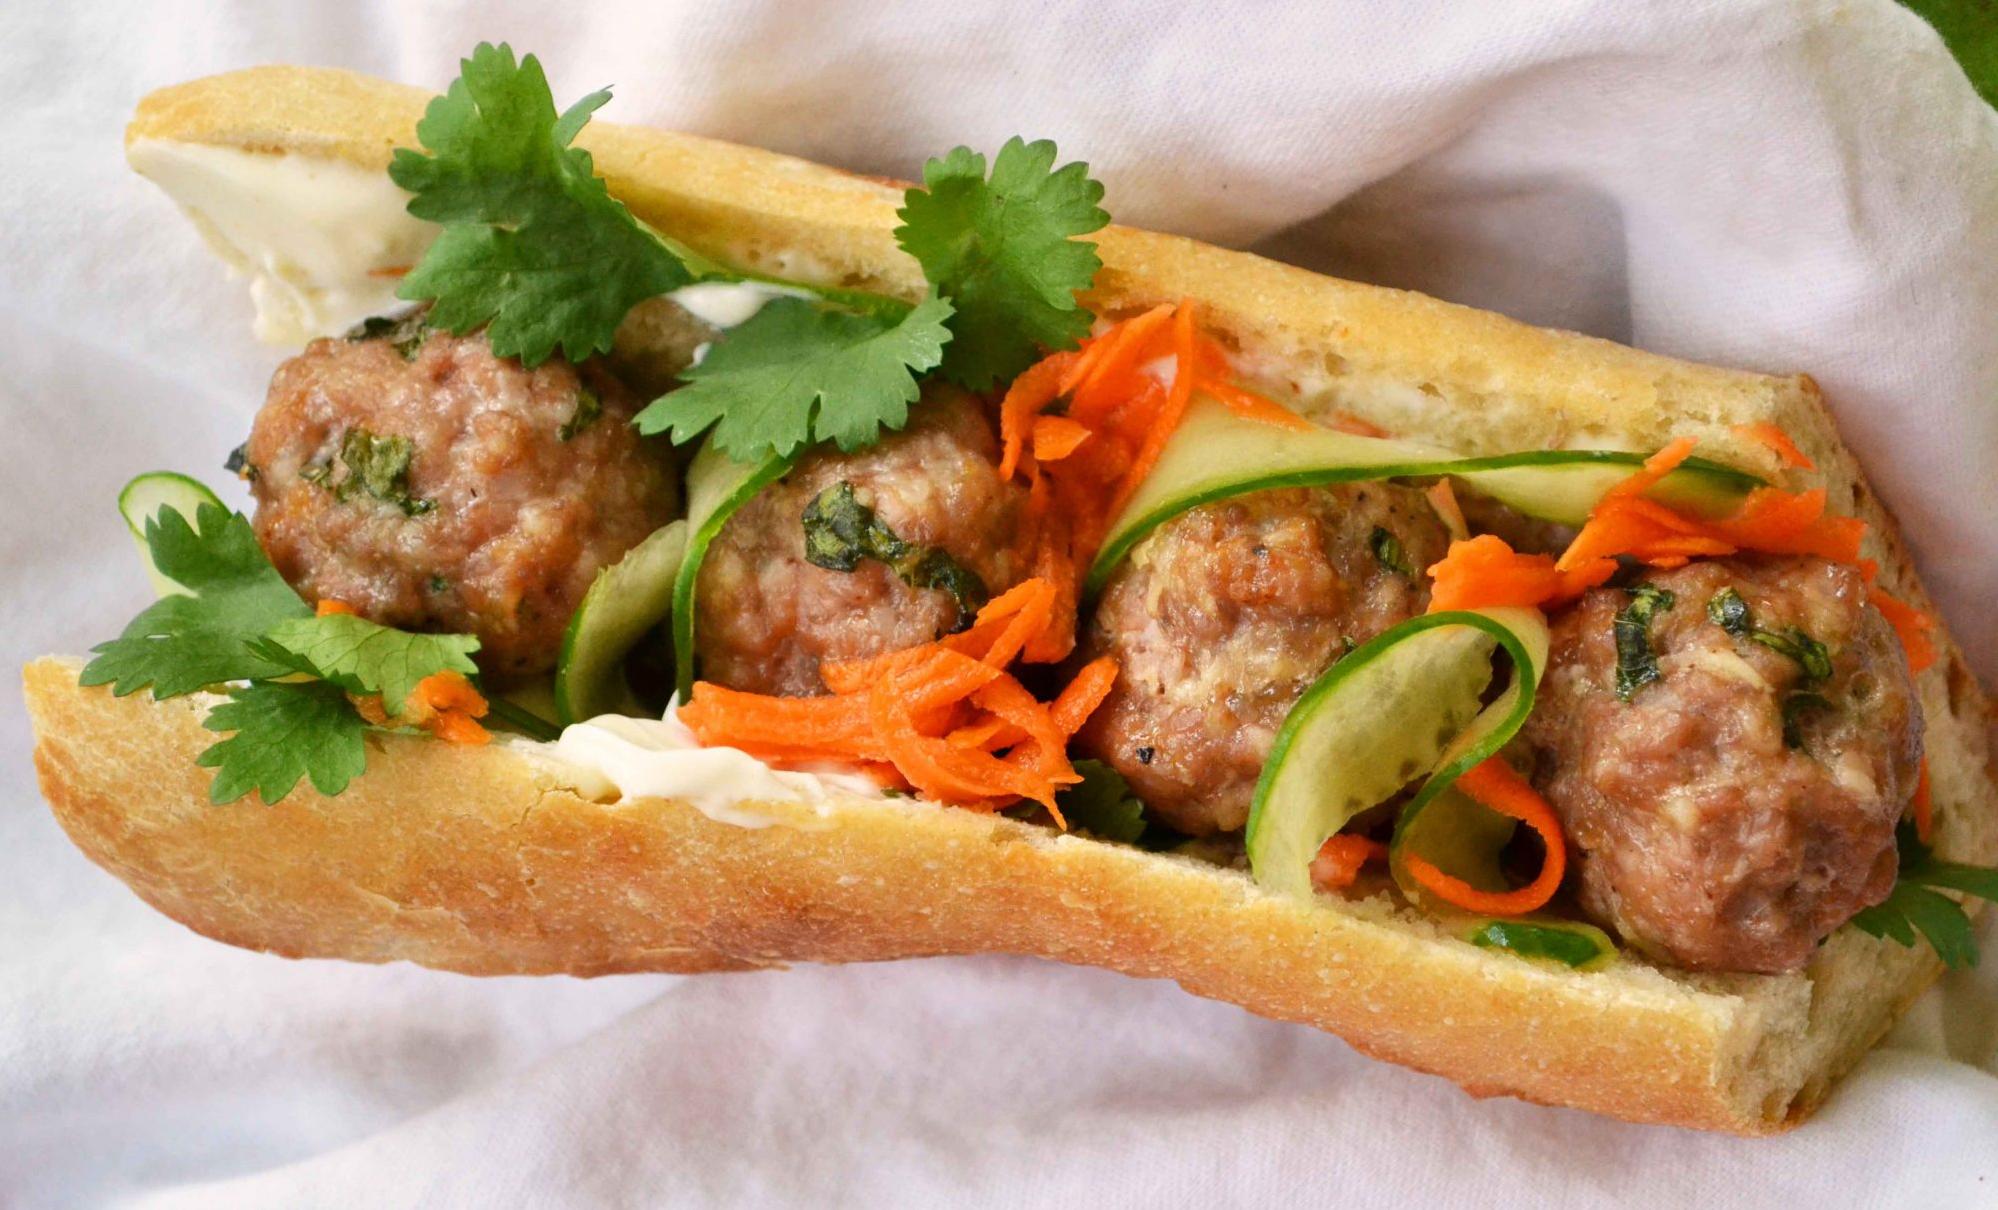  Ready to taste the traditional flavors of Vietnamese cuisine in one sandwich?